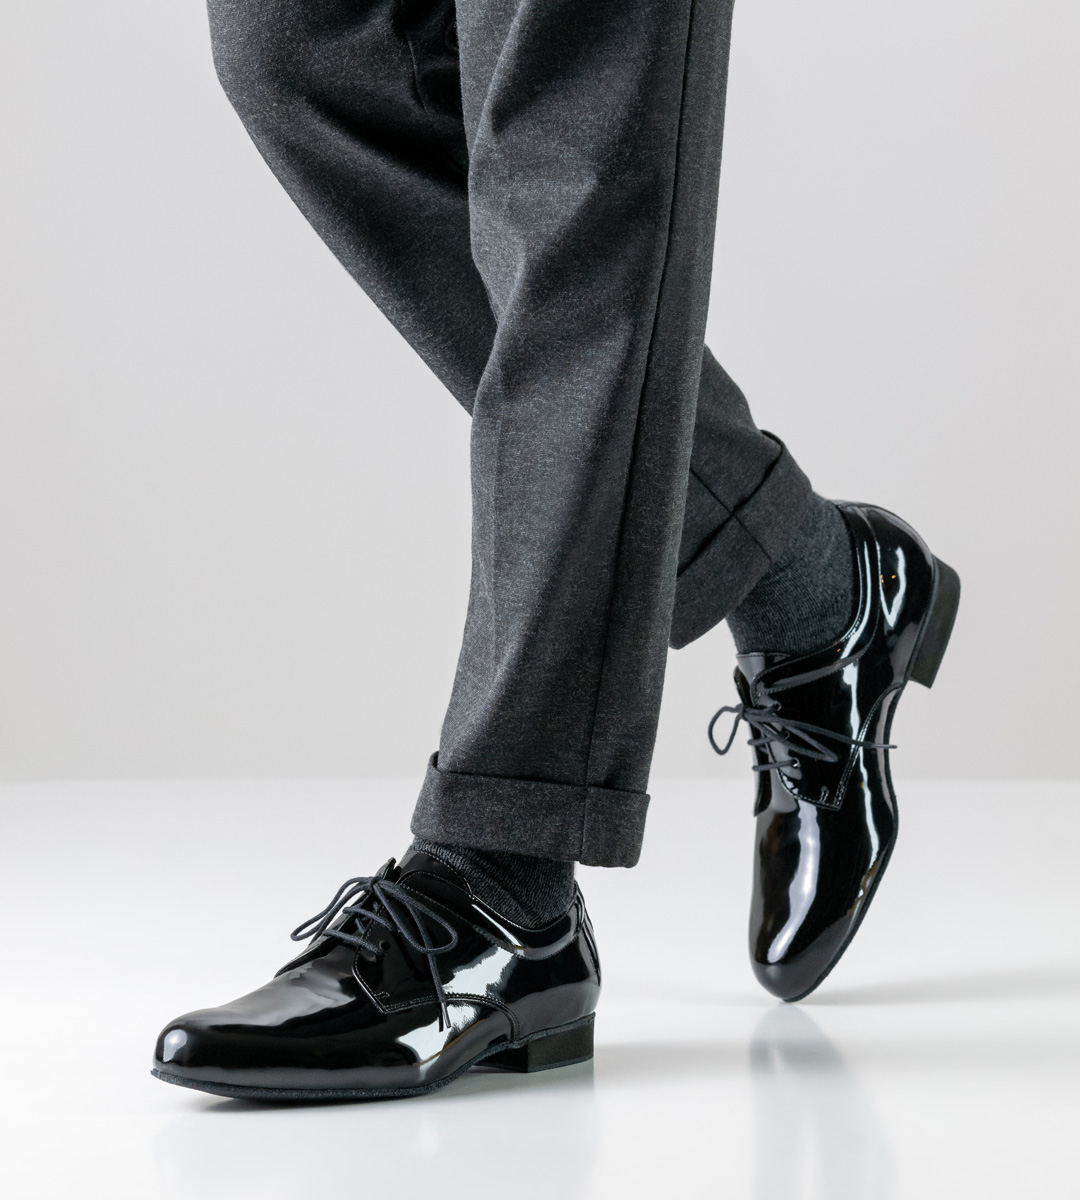 Grey trousers in combination with 2 cm high Werner Kern men's dance shoe for standard dances